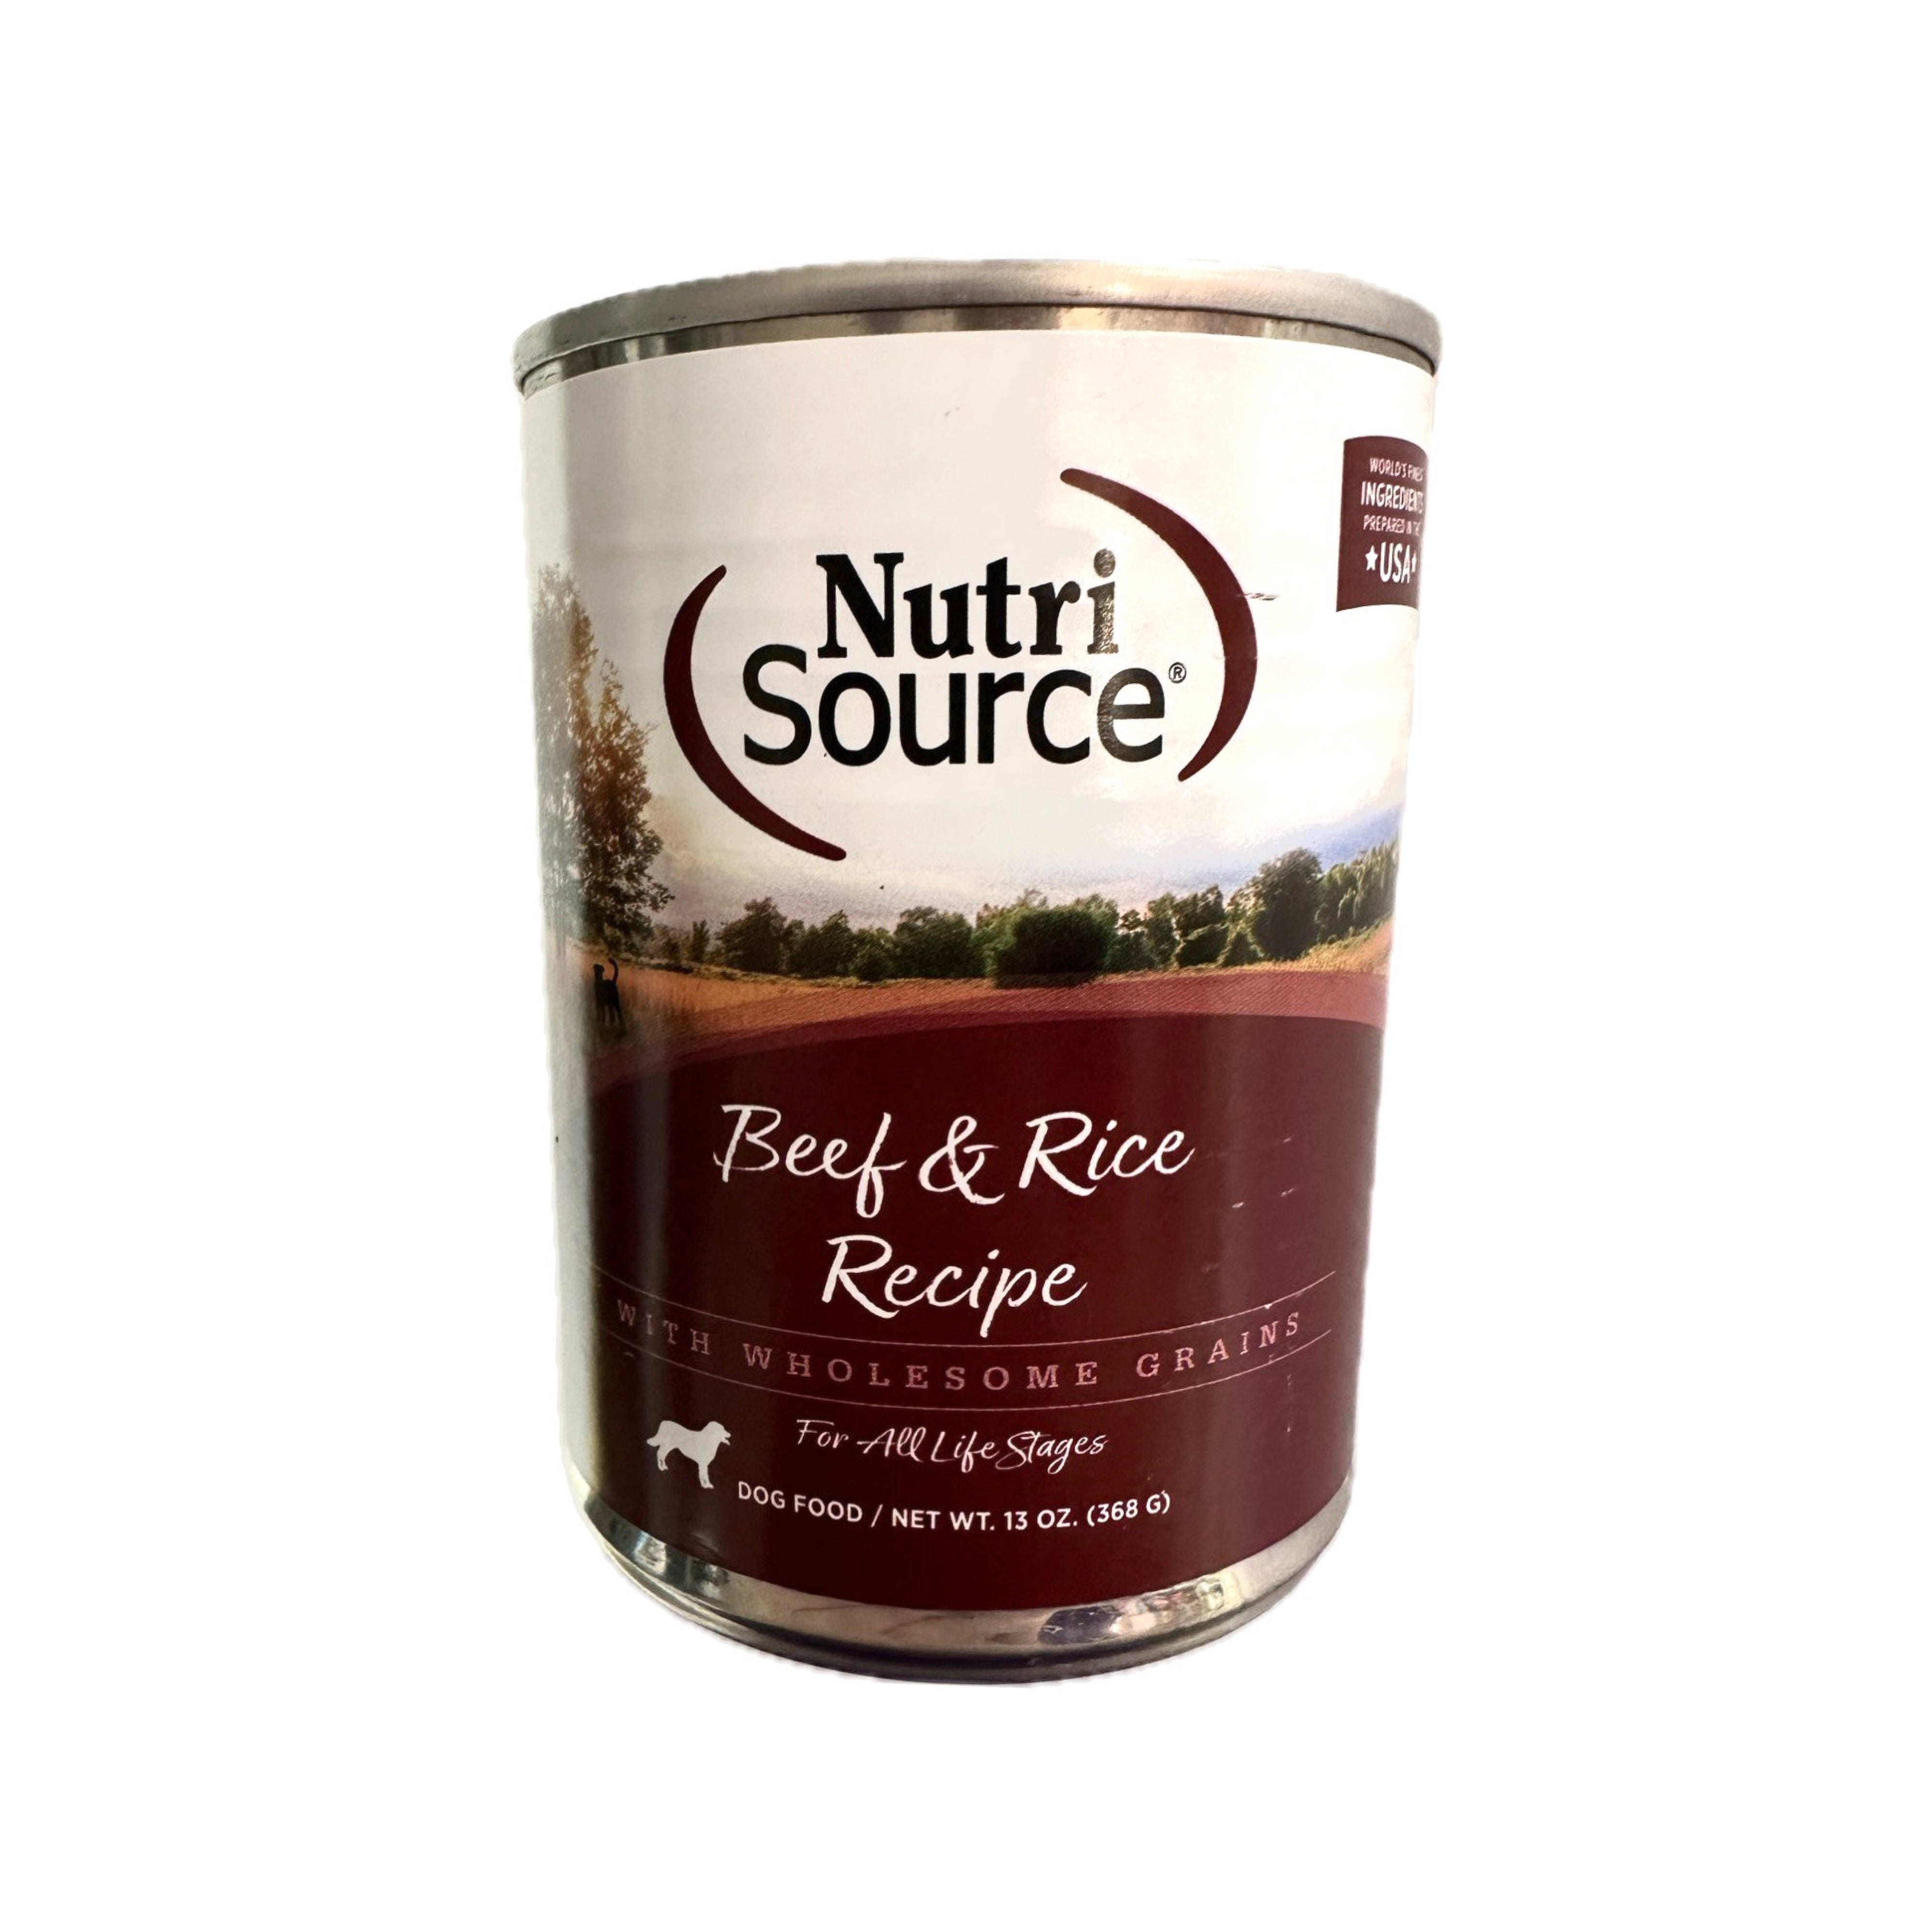 NutriSource Beef & Rice Recipe with Wholesome Grains Canned Dog Food